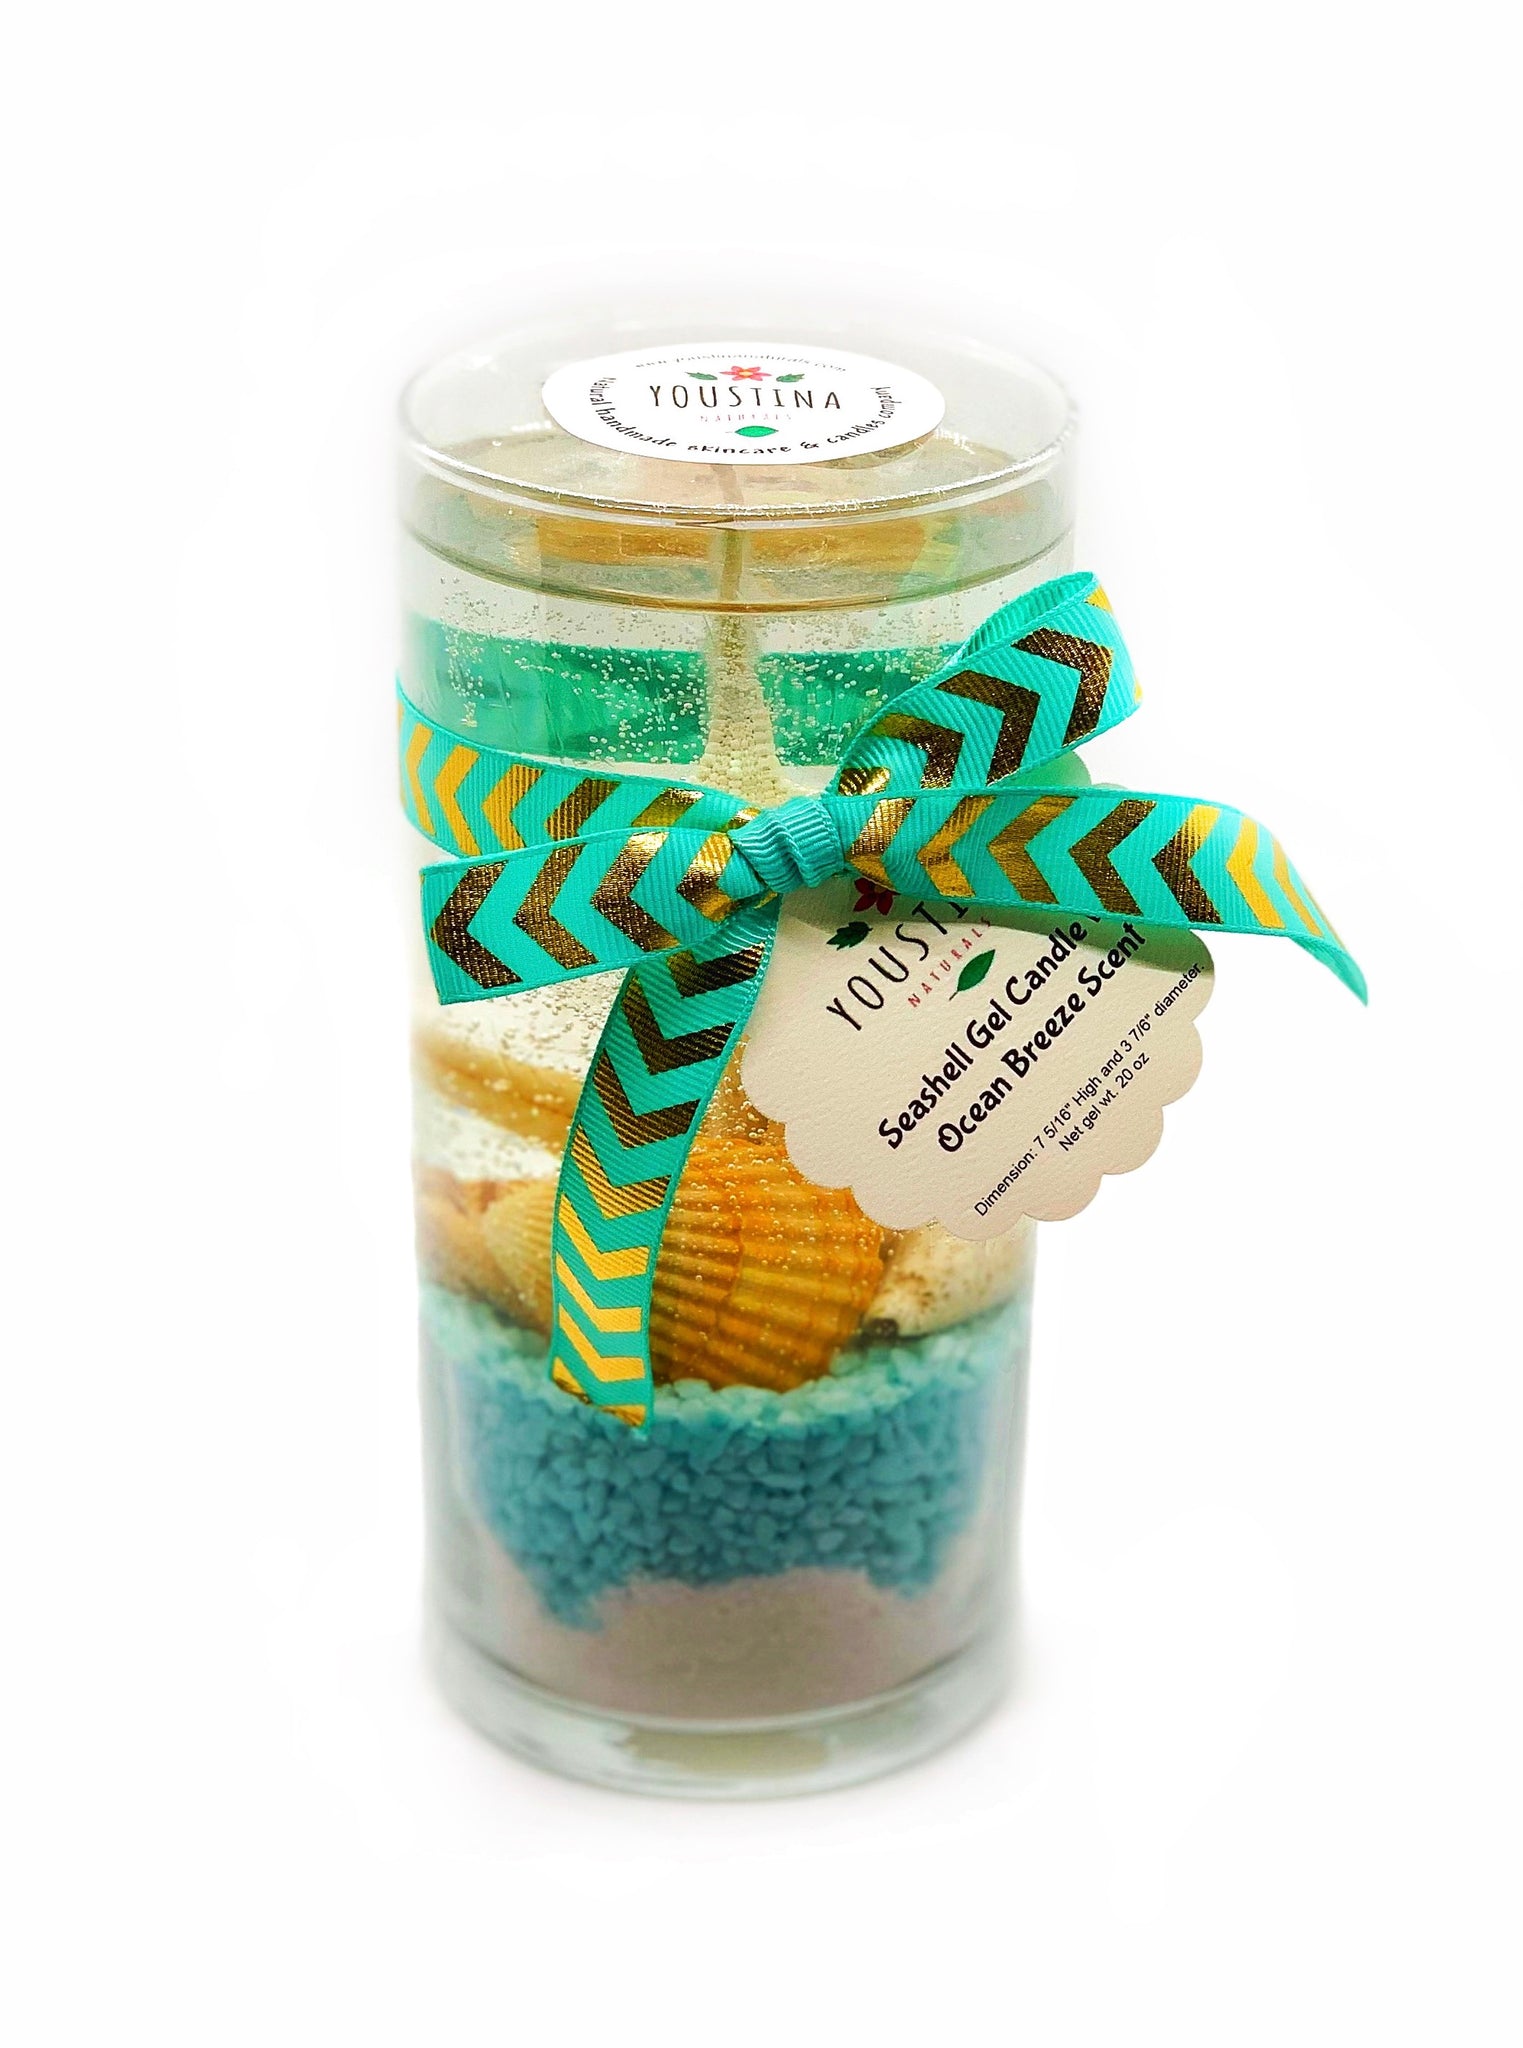 Nature's Gift - Ocean - Natural Wax Gel Candle – Candle Castle & Co.